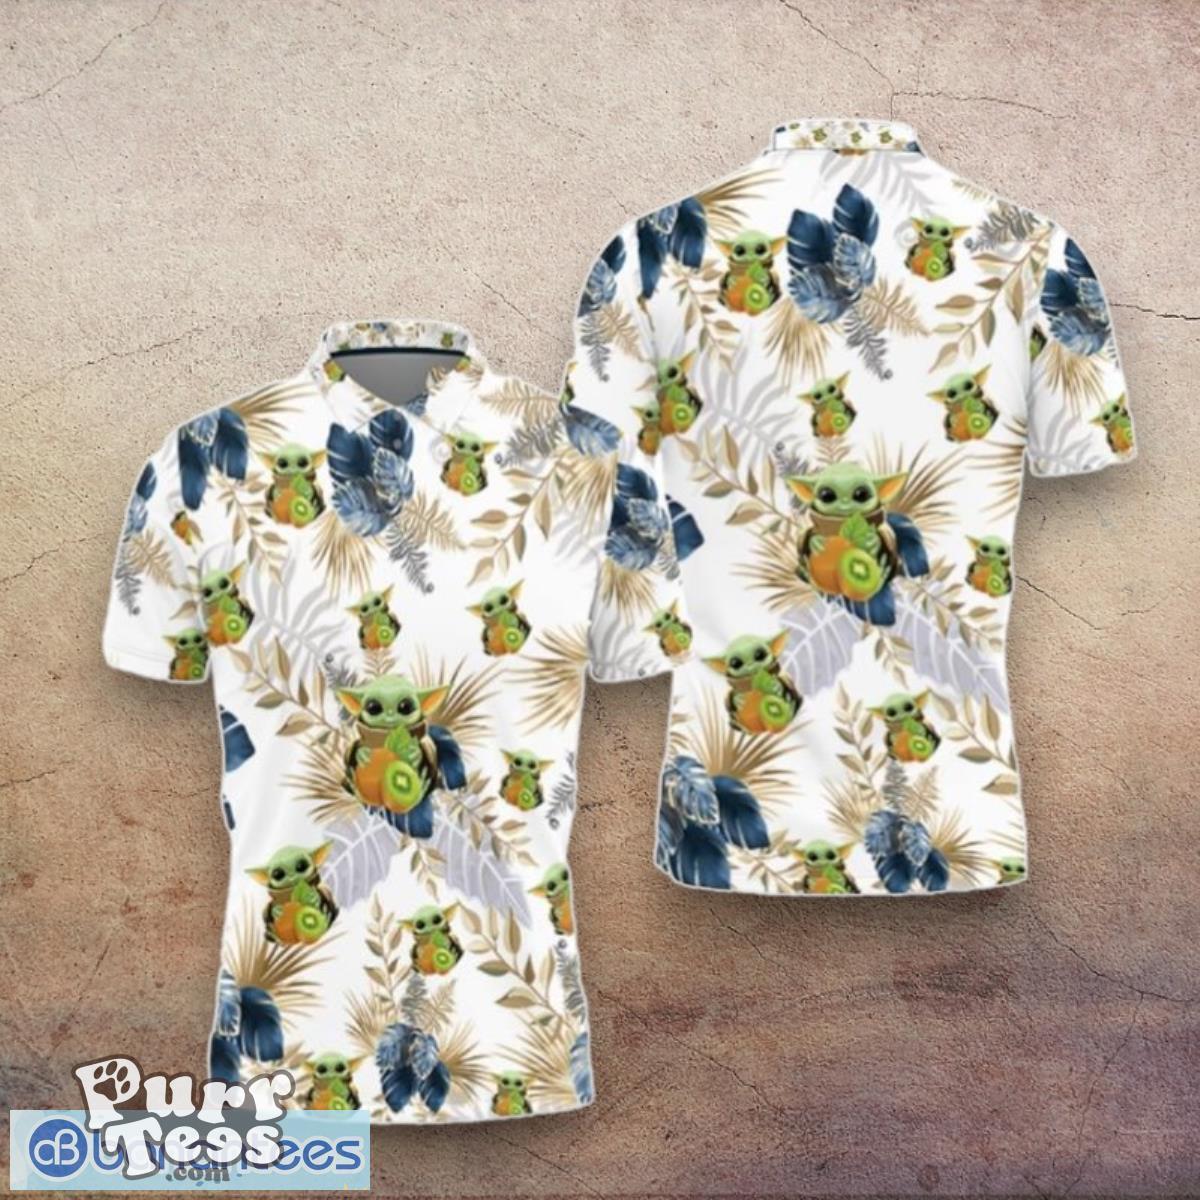 Baby Yoda Hugging Kiwis Seamless Tropical Blue And Green Leaves On White Polo Shirts Style Gift Product Photo 1